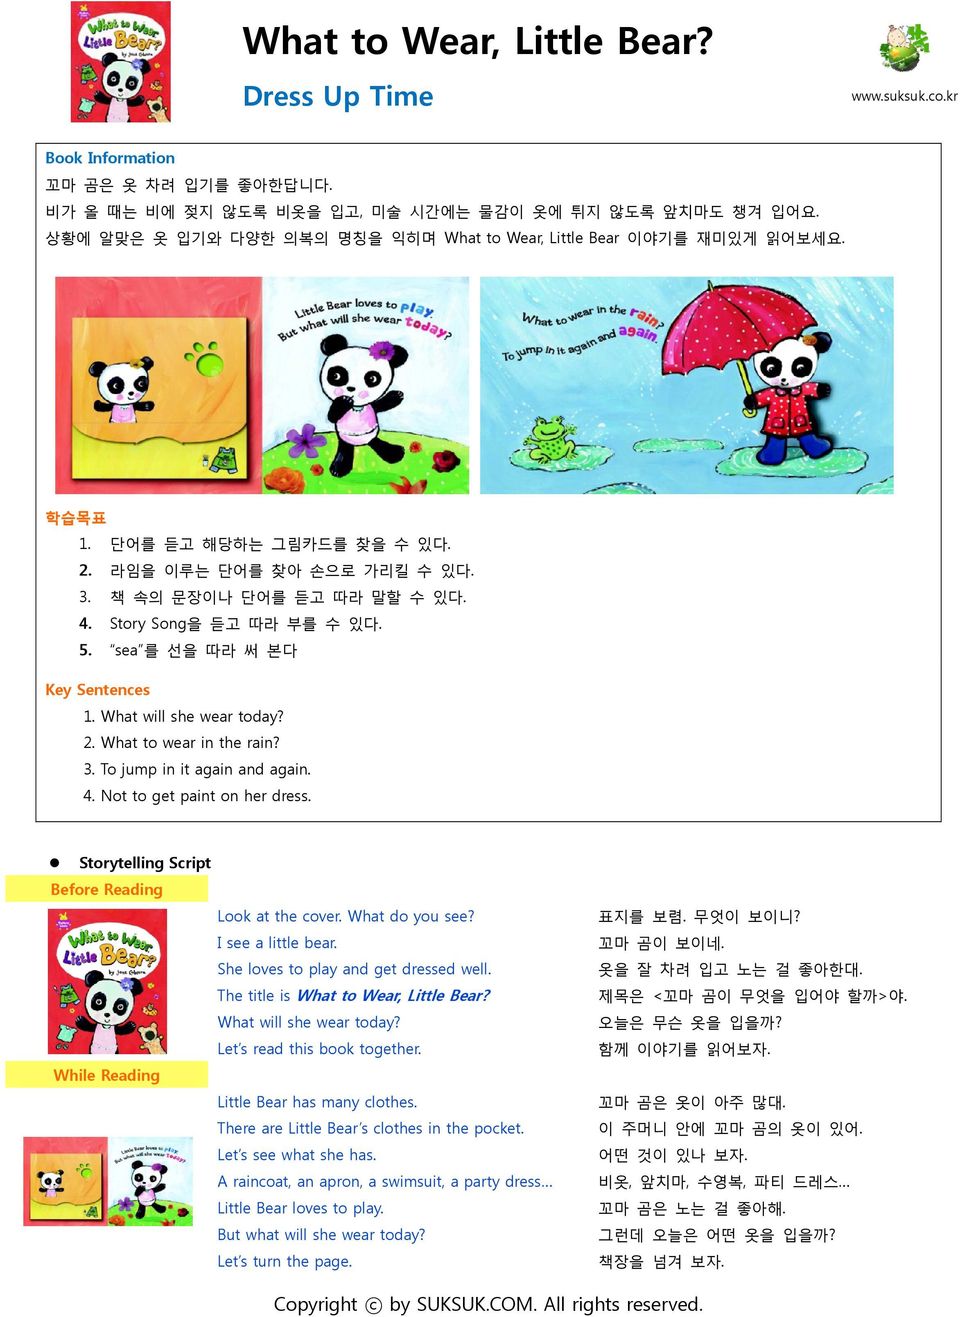 Story Song을 듣고 따라 부를 수 있다. 5. sea 를 선을 따라 써 본다 Key Sentences 1. What will she wear today? 2. What to wear in the rain? 3. To jump in it again and again. 4. Not to get paint on her dress.